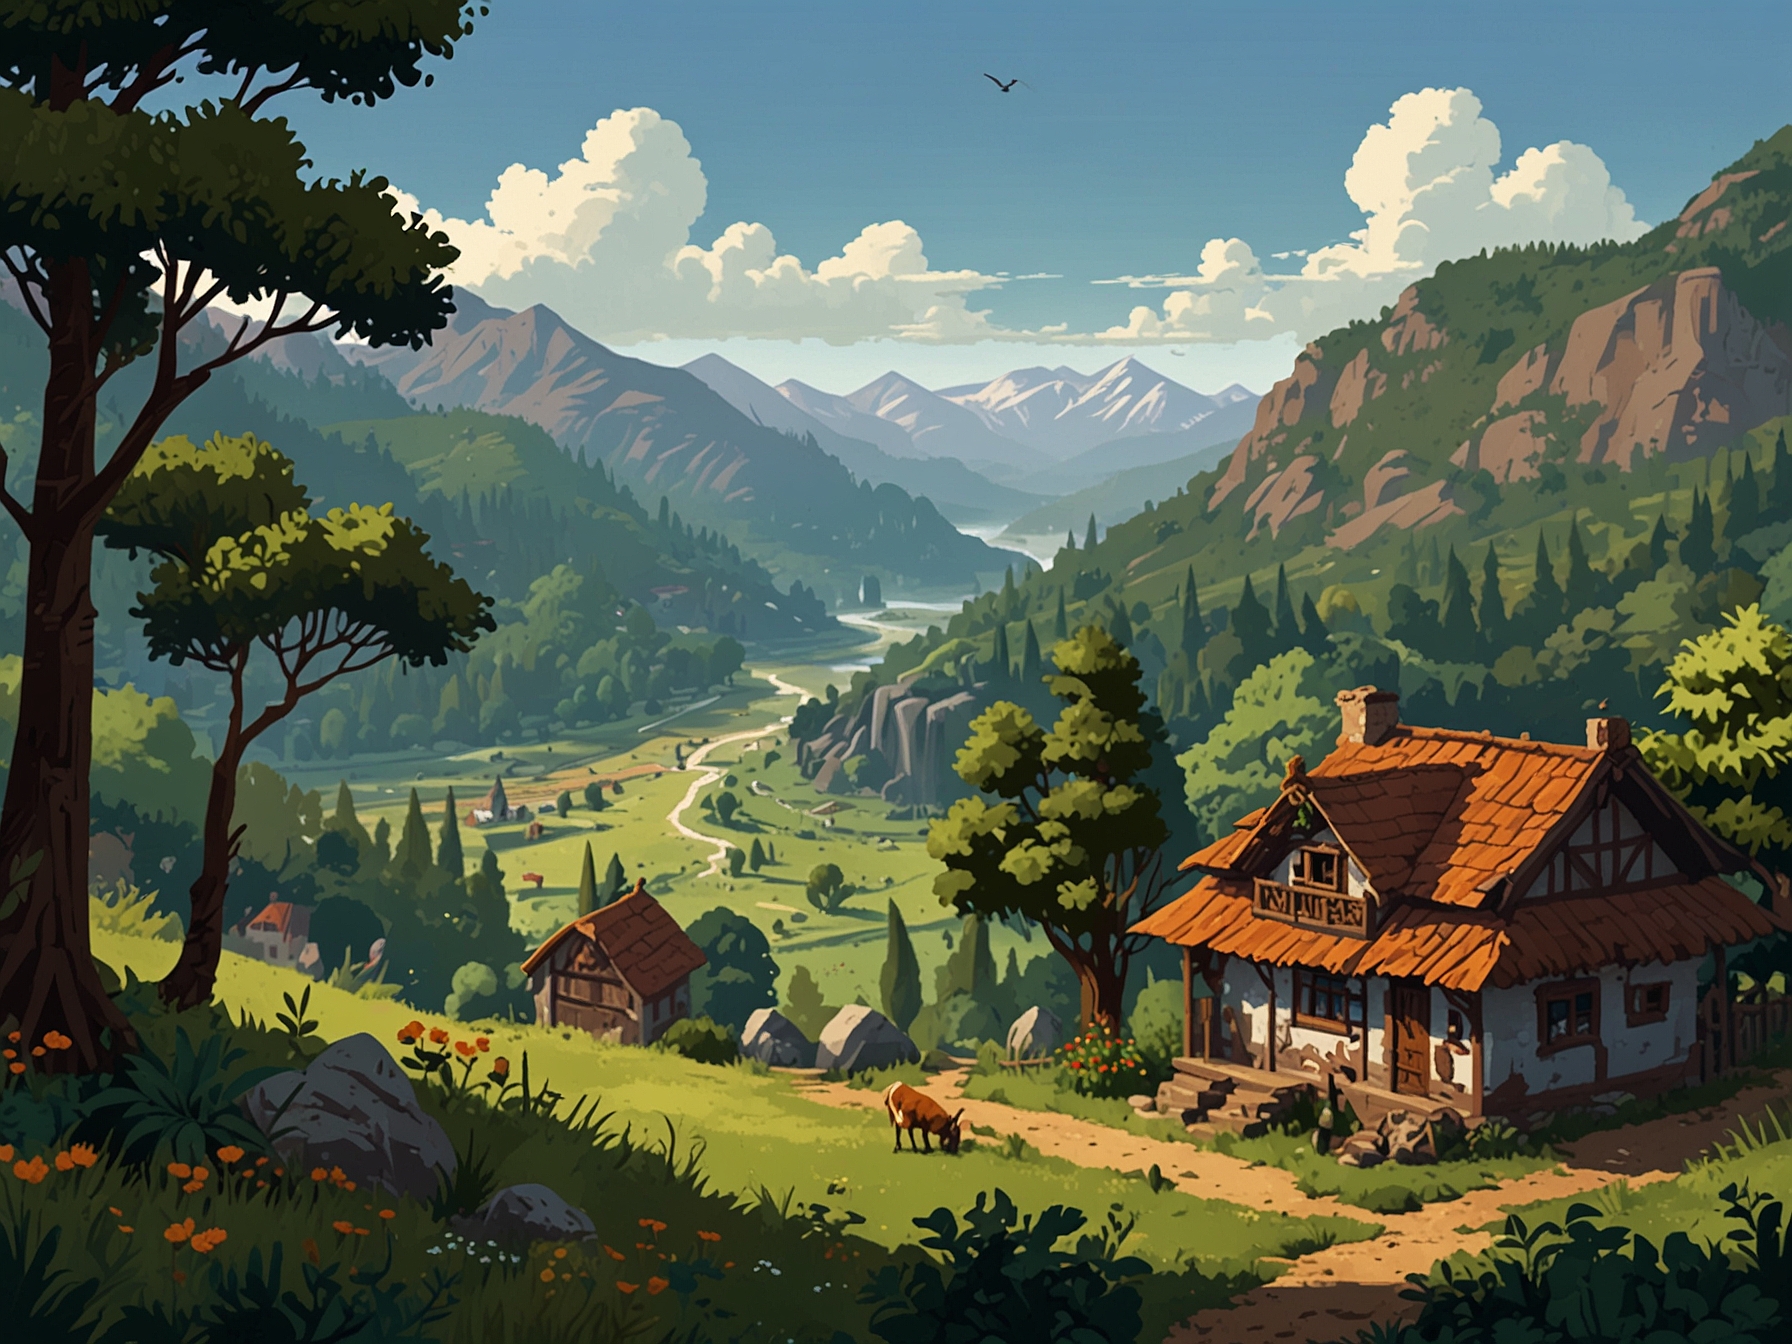 A pixel art scene from Everafter Falls depicting the tranquil valley, complete with lush farmland, charming houses, and townsfolk going about their day.